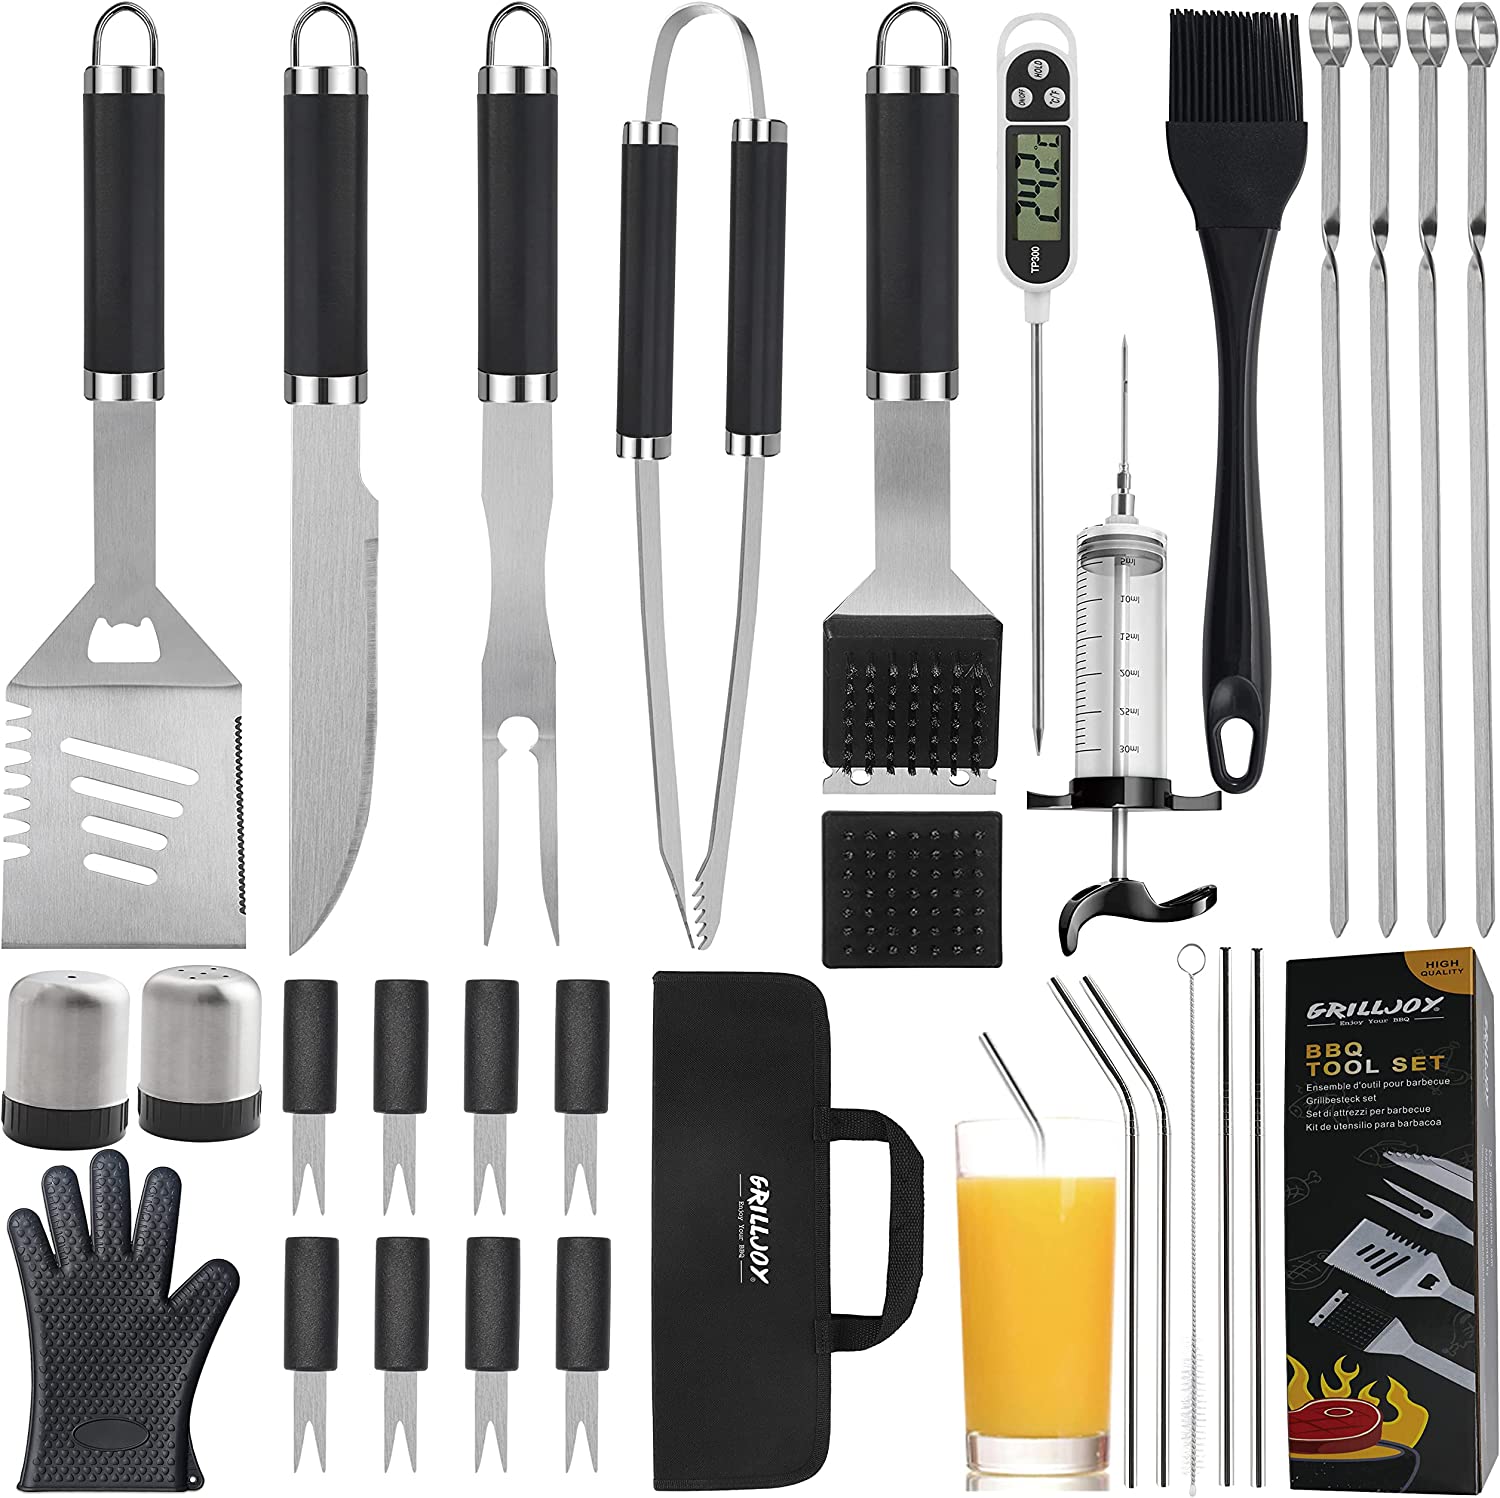 POLIGO 22PCS Heavy Duty BBQ Grill Accessories Set, Non-Slip Grill Tools for  Outdoor Grill Set Thicker Stainless Steel Grill Utensils Set, Deluxe